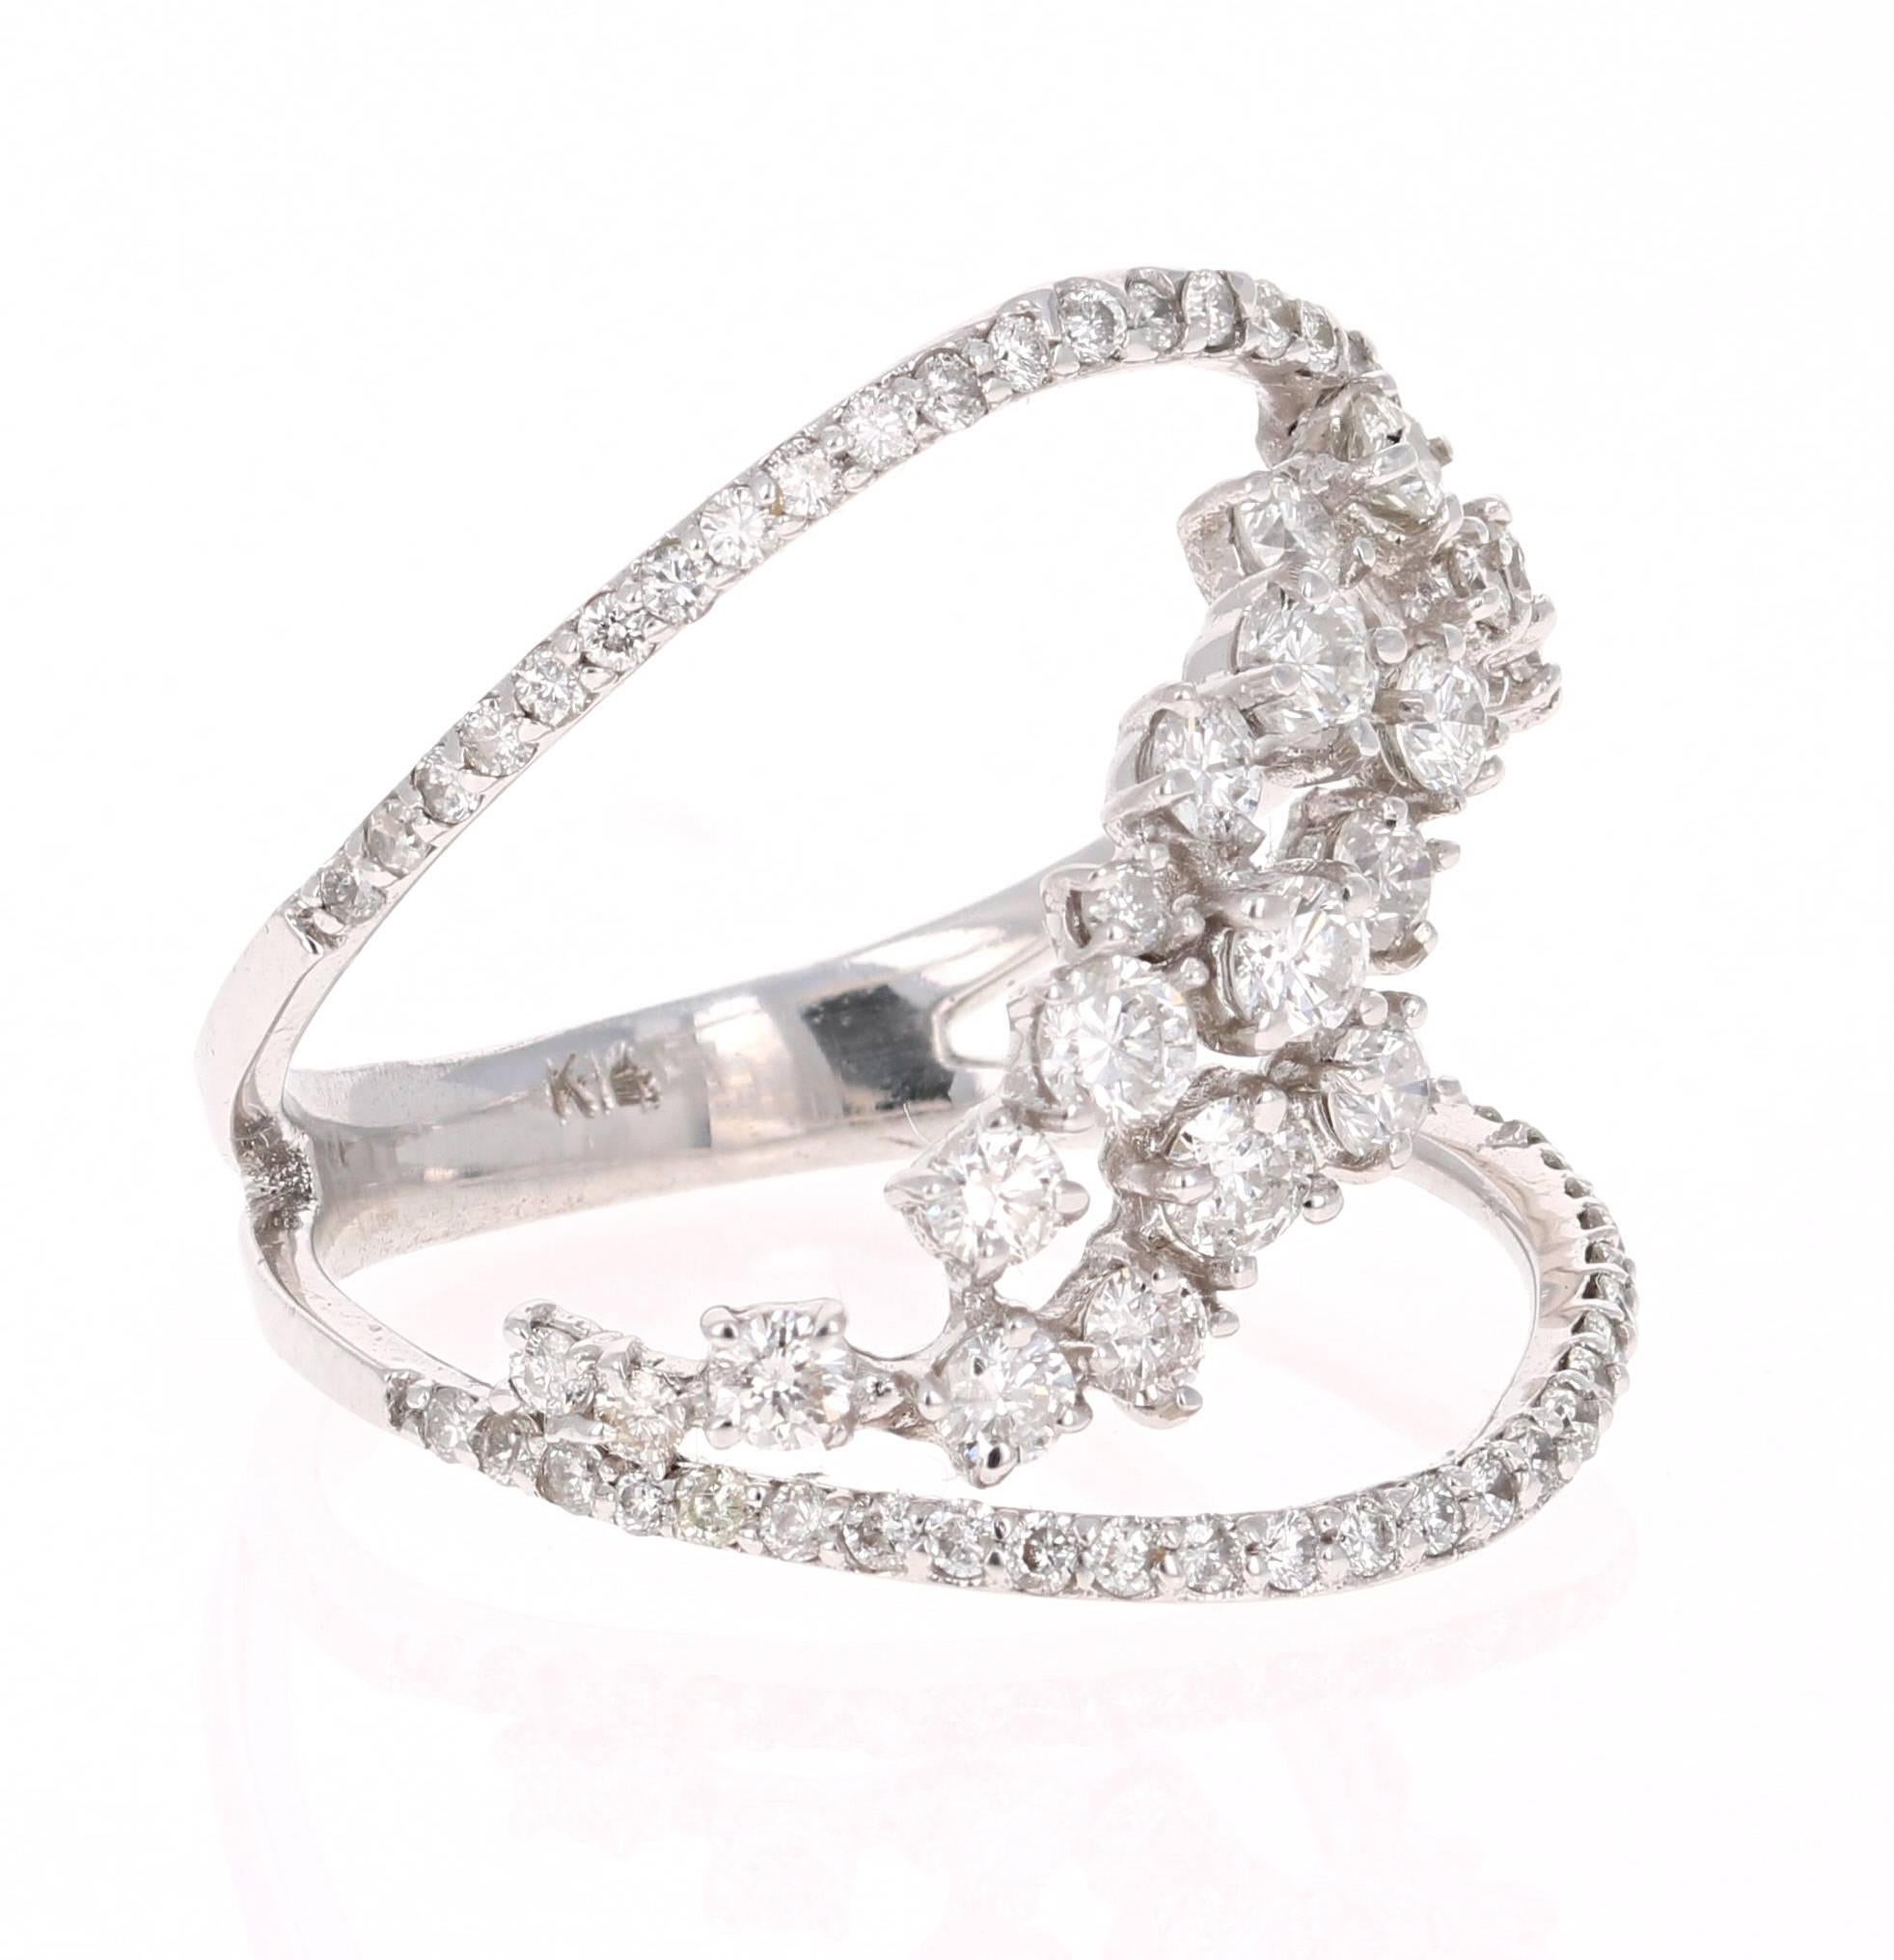 A gorgeous cocktail ring with a setting that sits well on the index, middle or ring fingers! Very much on trend with the modern day rings. Can be worn as a statement ring which screams out #bossbabe #bosslady
The ring has 74 Round Cut Diamonds that